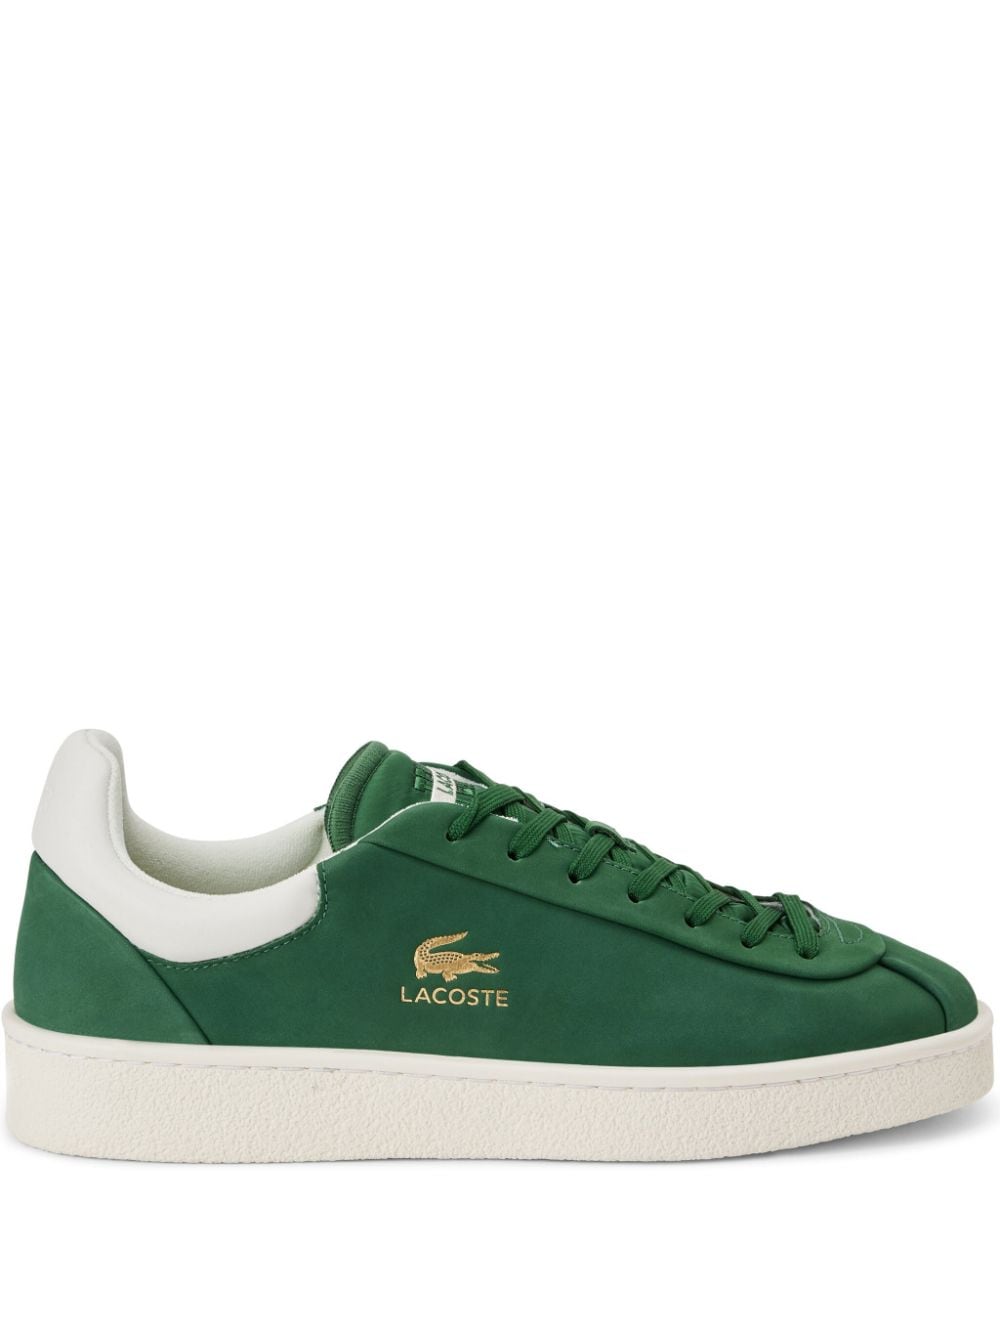 Lacoste Baseshot leather sneakers - Green von Lacoste